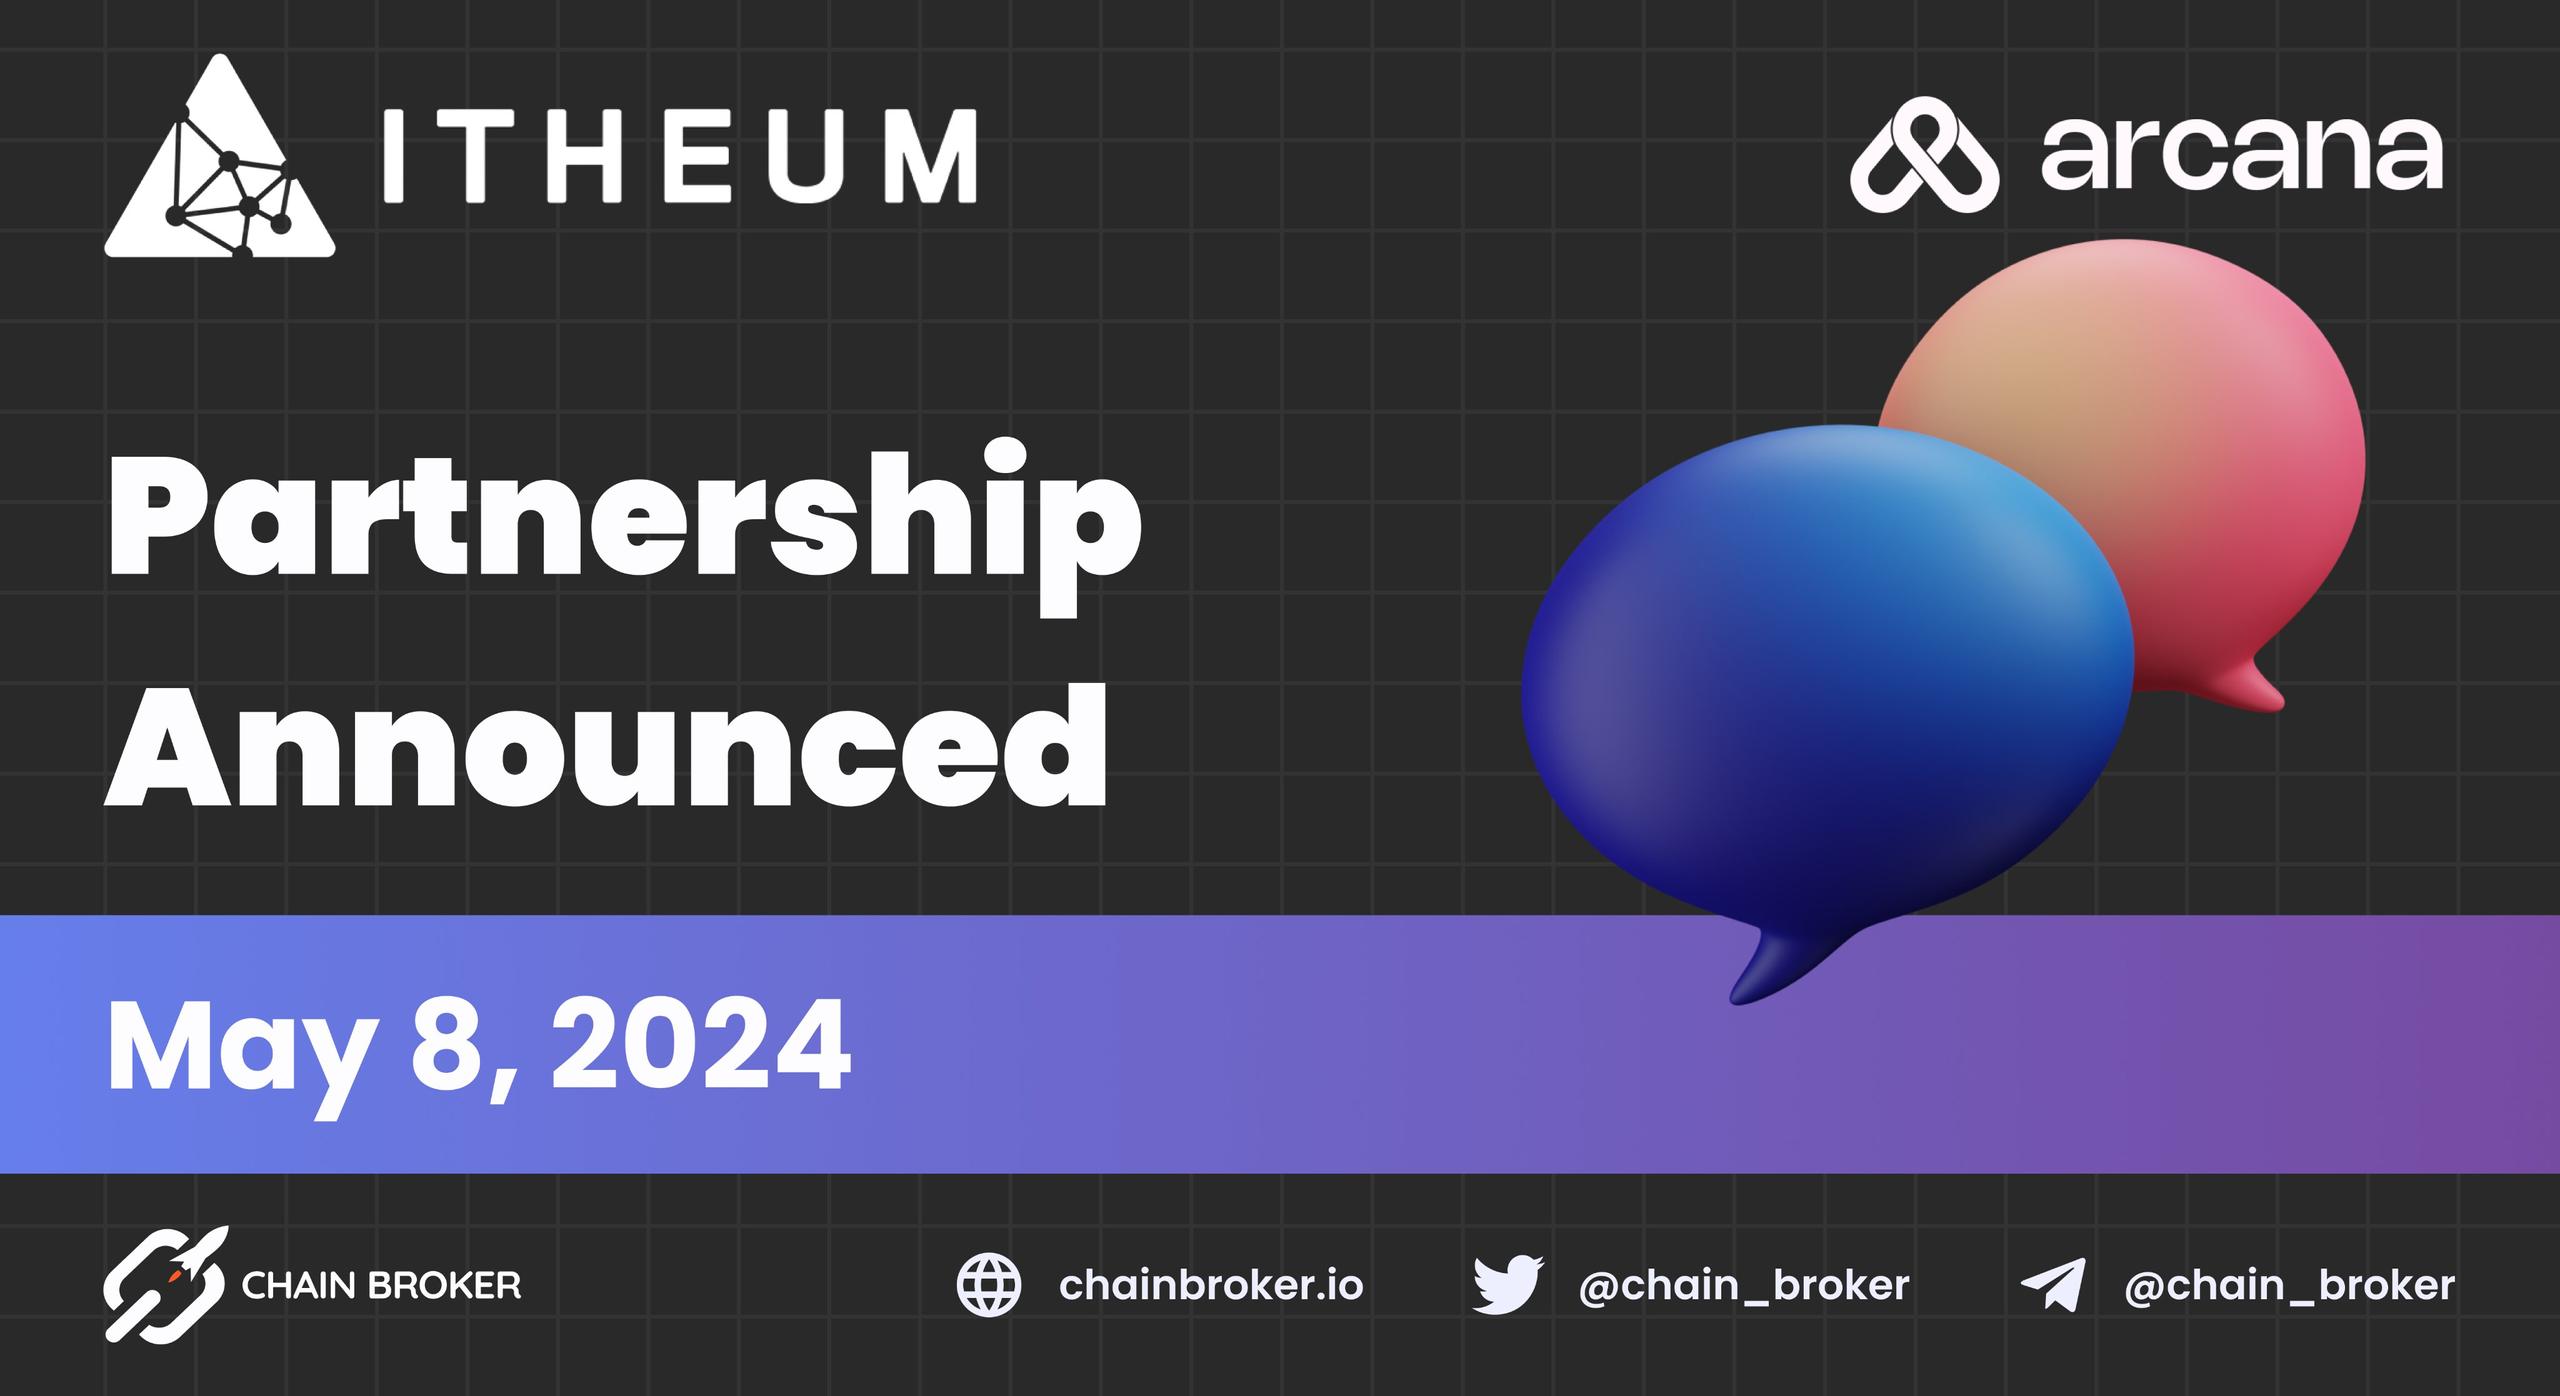 Itheum Partners with Arcana Network